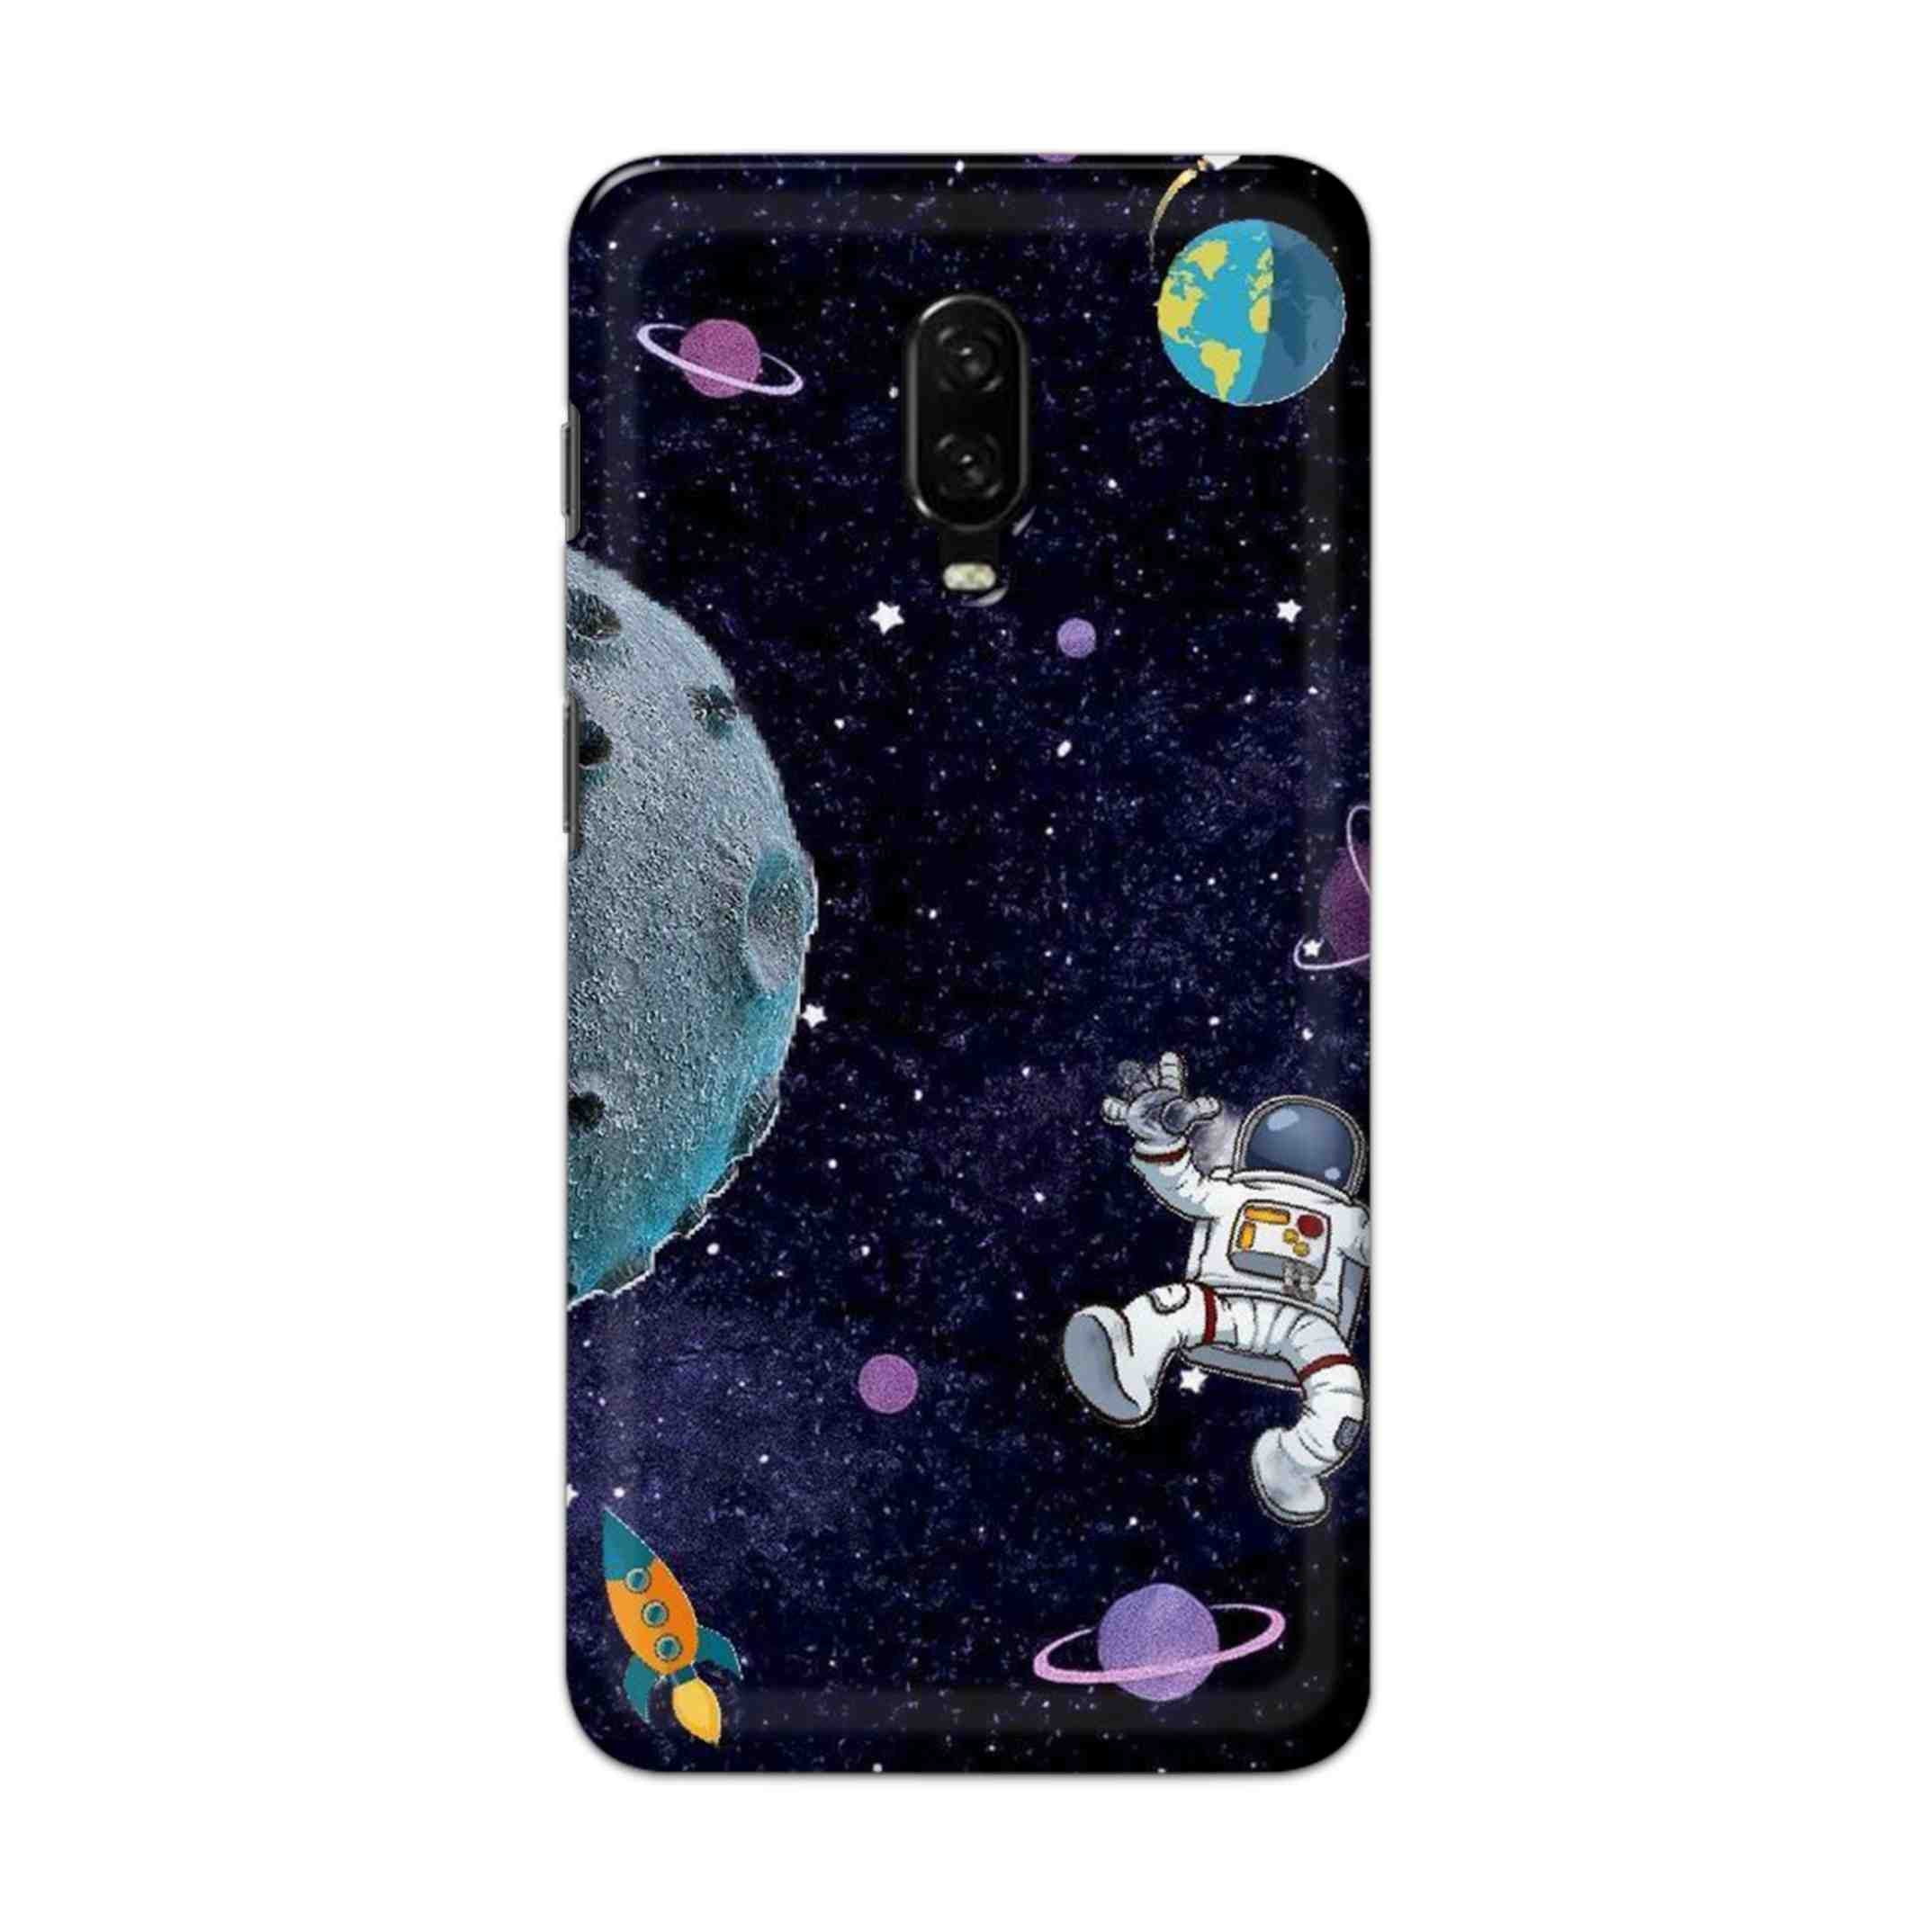 Buy Space Hard Back Mobile Phone Case Cover For OnePlus 6T Online